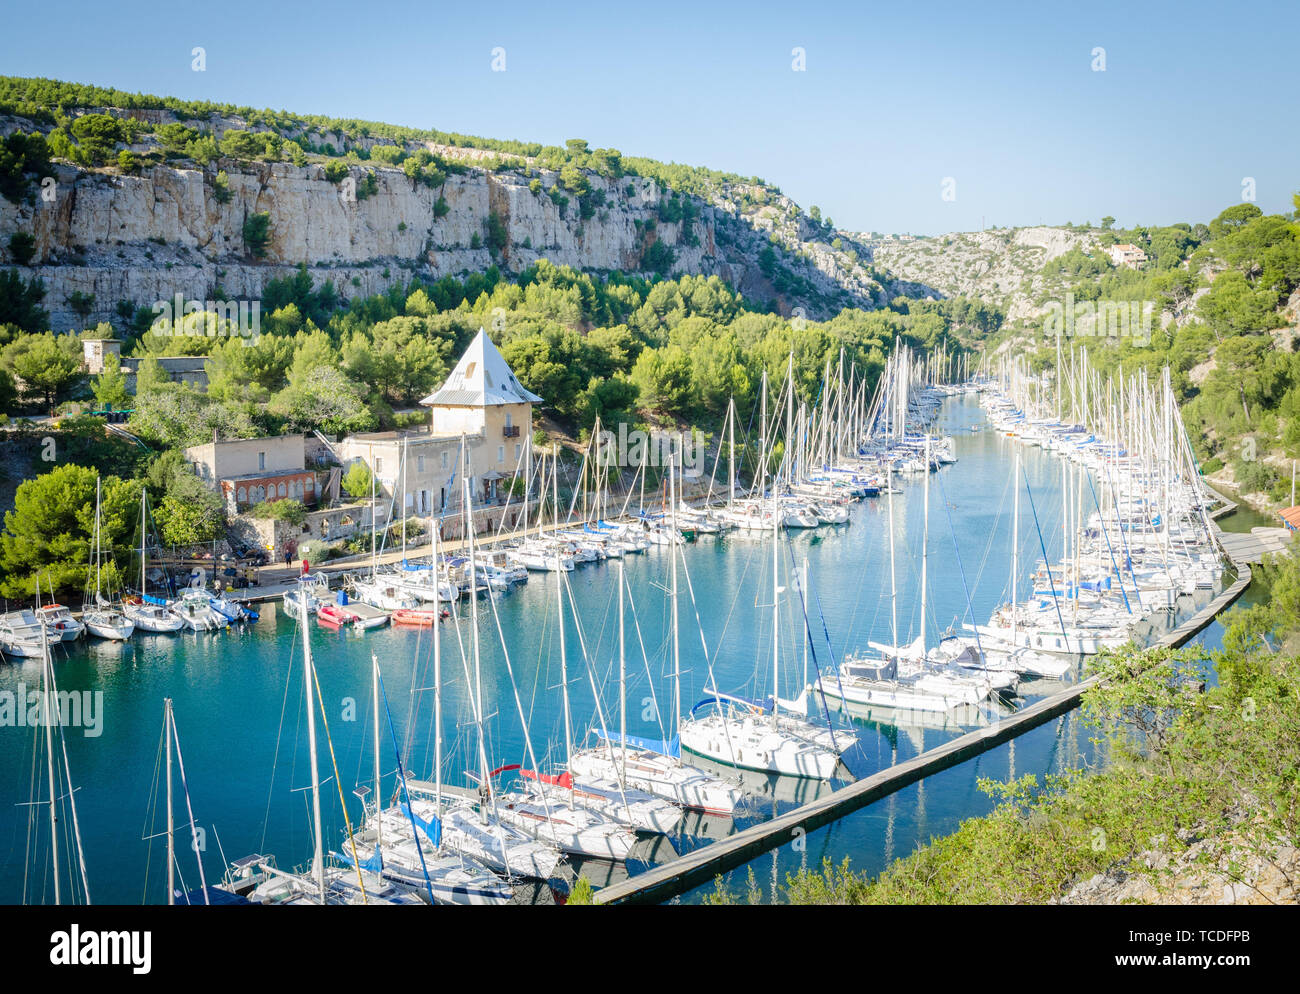 Turquoise water of Calanque Port Miou, near Cassis, Marseille, France. Stock Photo